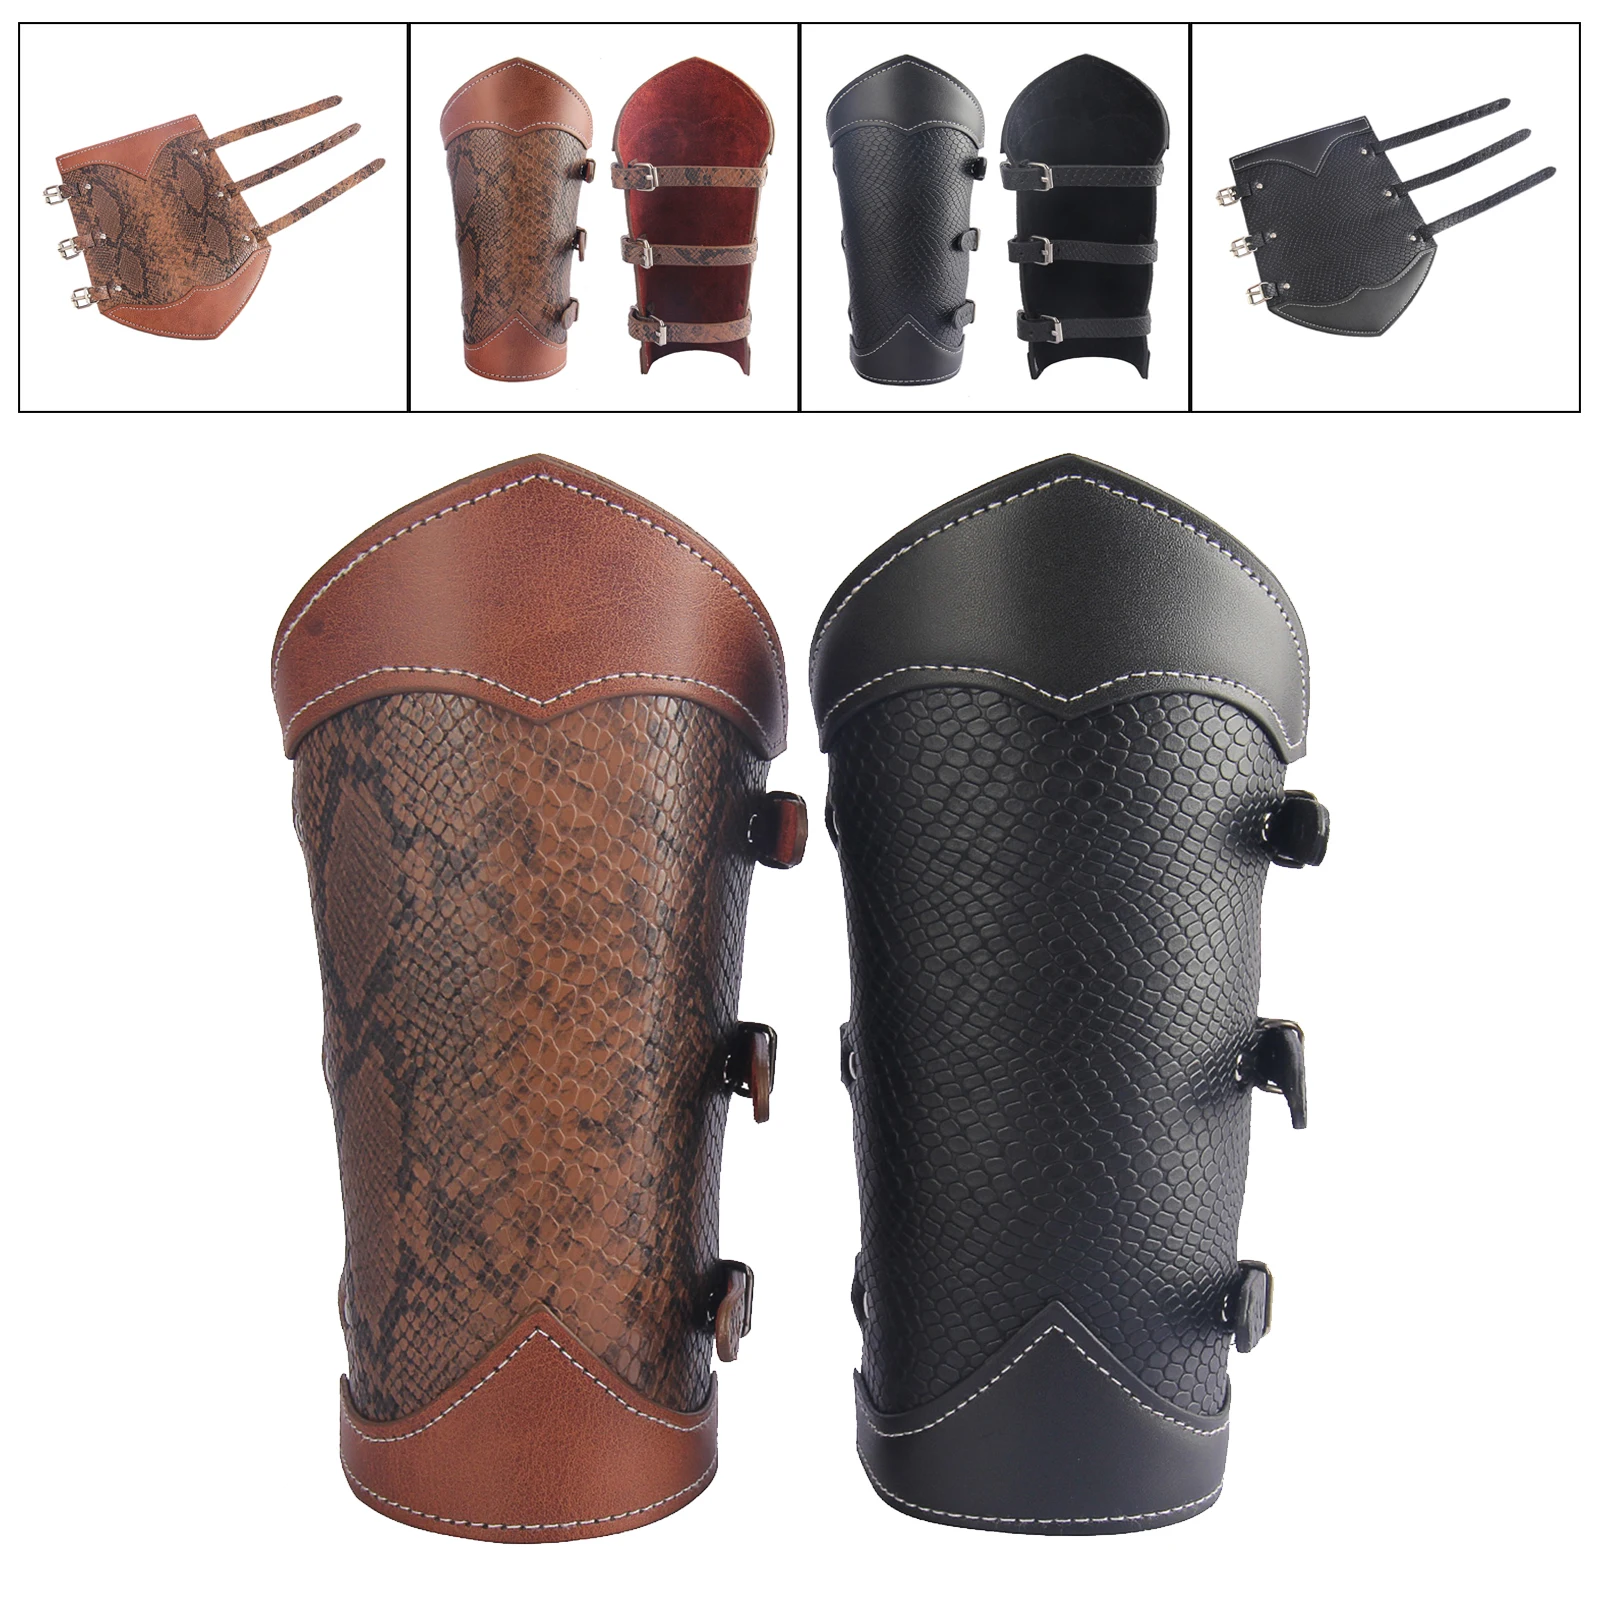 PU Leather Gauntlet Wristband Medieval Costume Bracers Wrist Guard Arm Armor Cuffs Cosplay